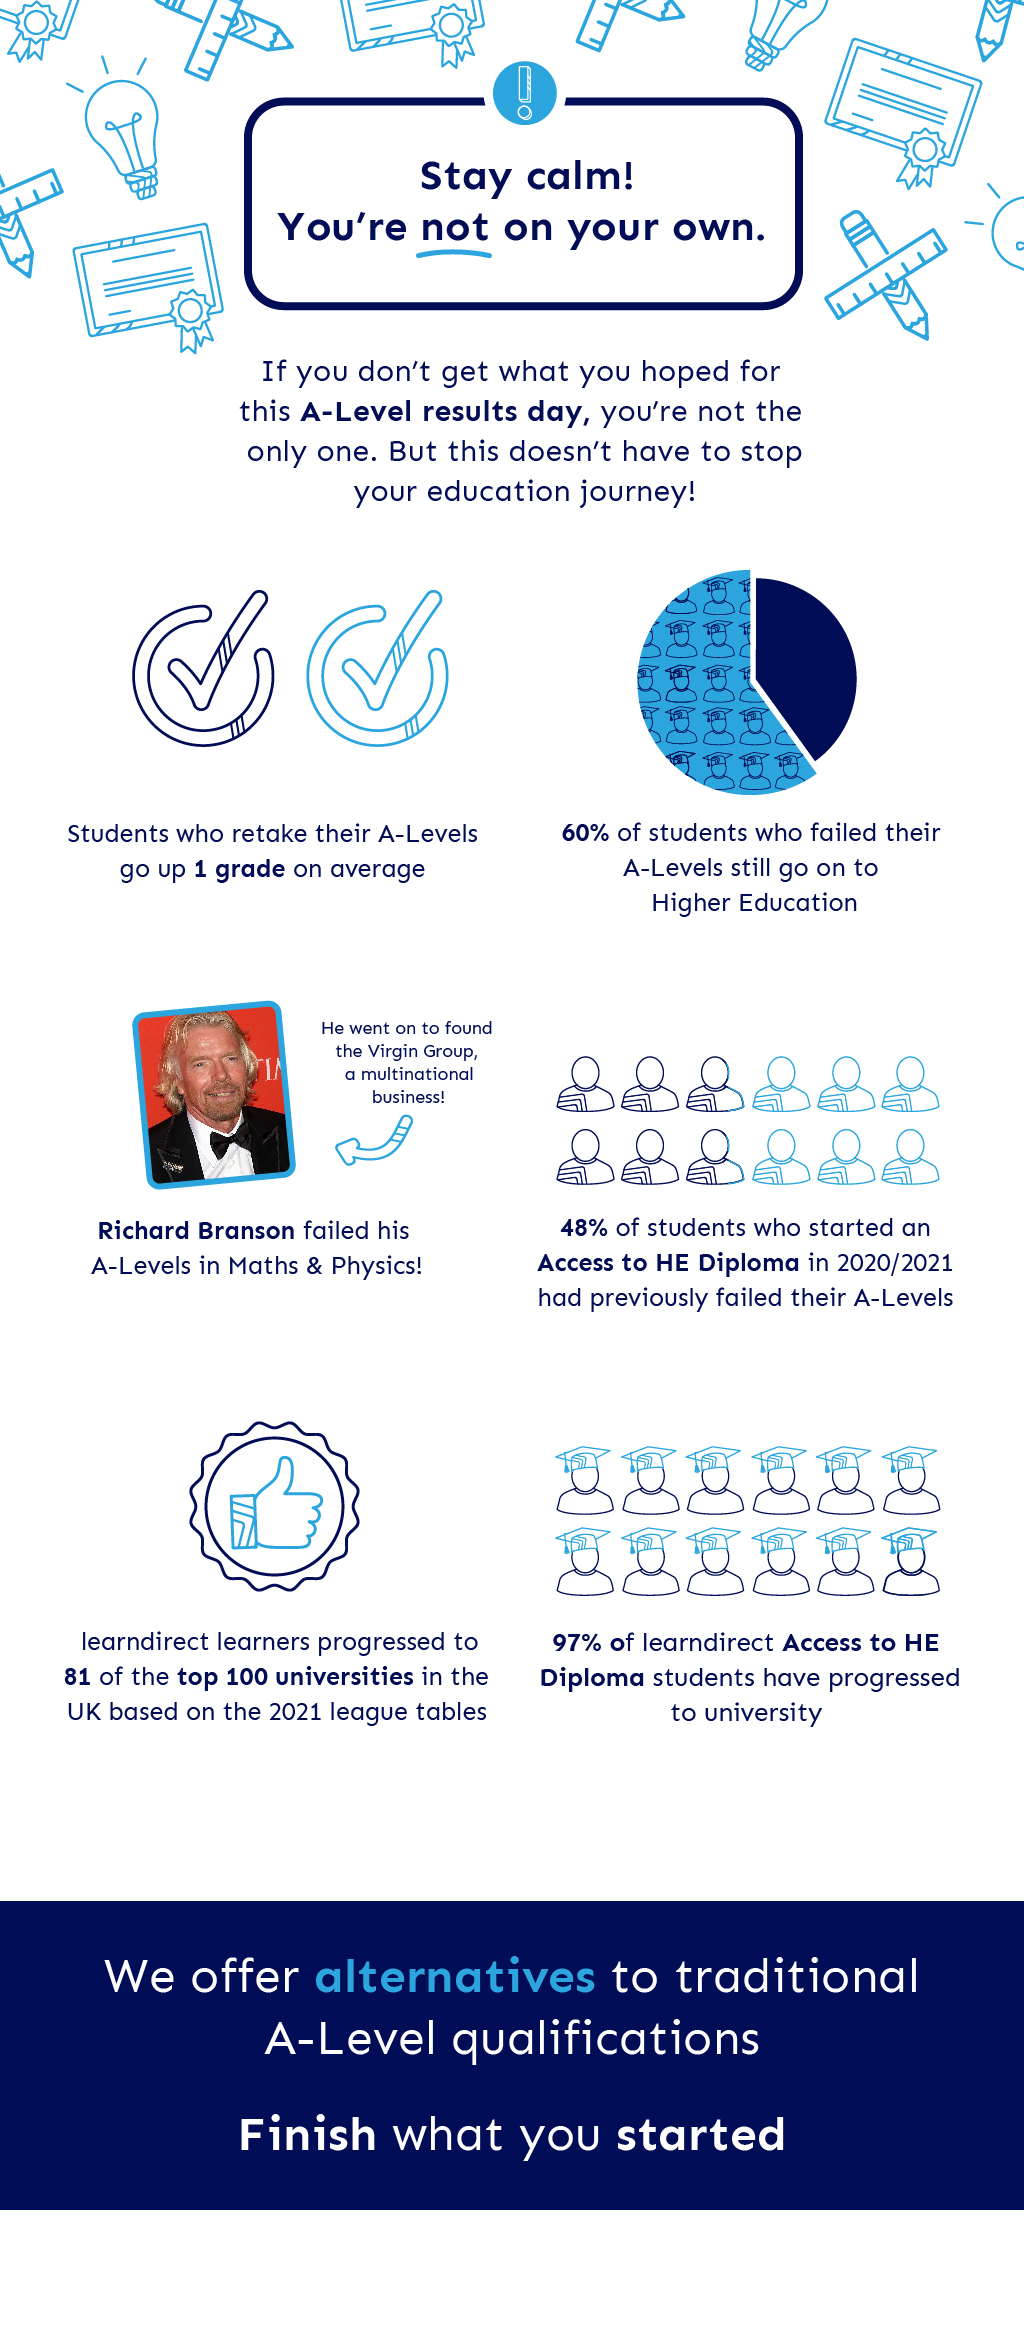 Do people do better in A-Level Resits? Infographic with statistics